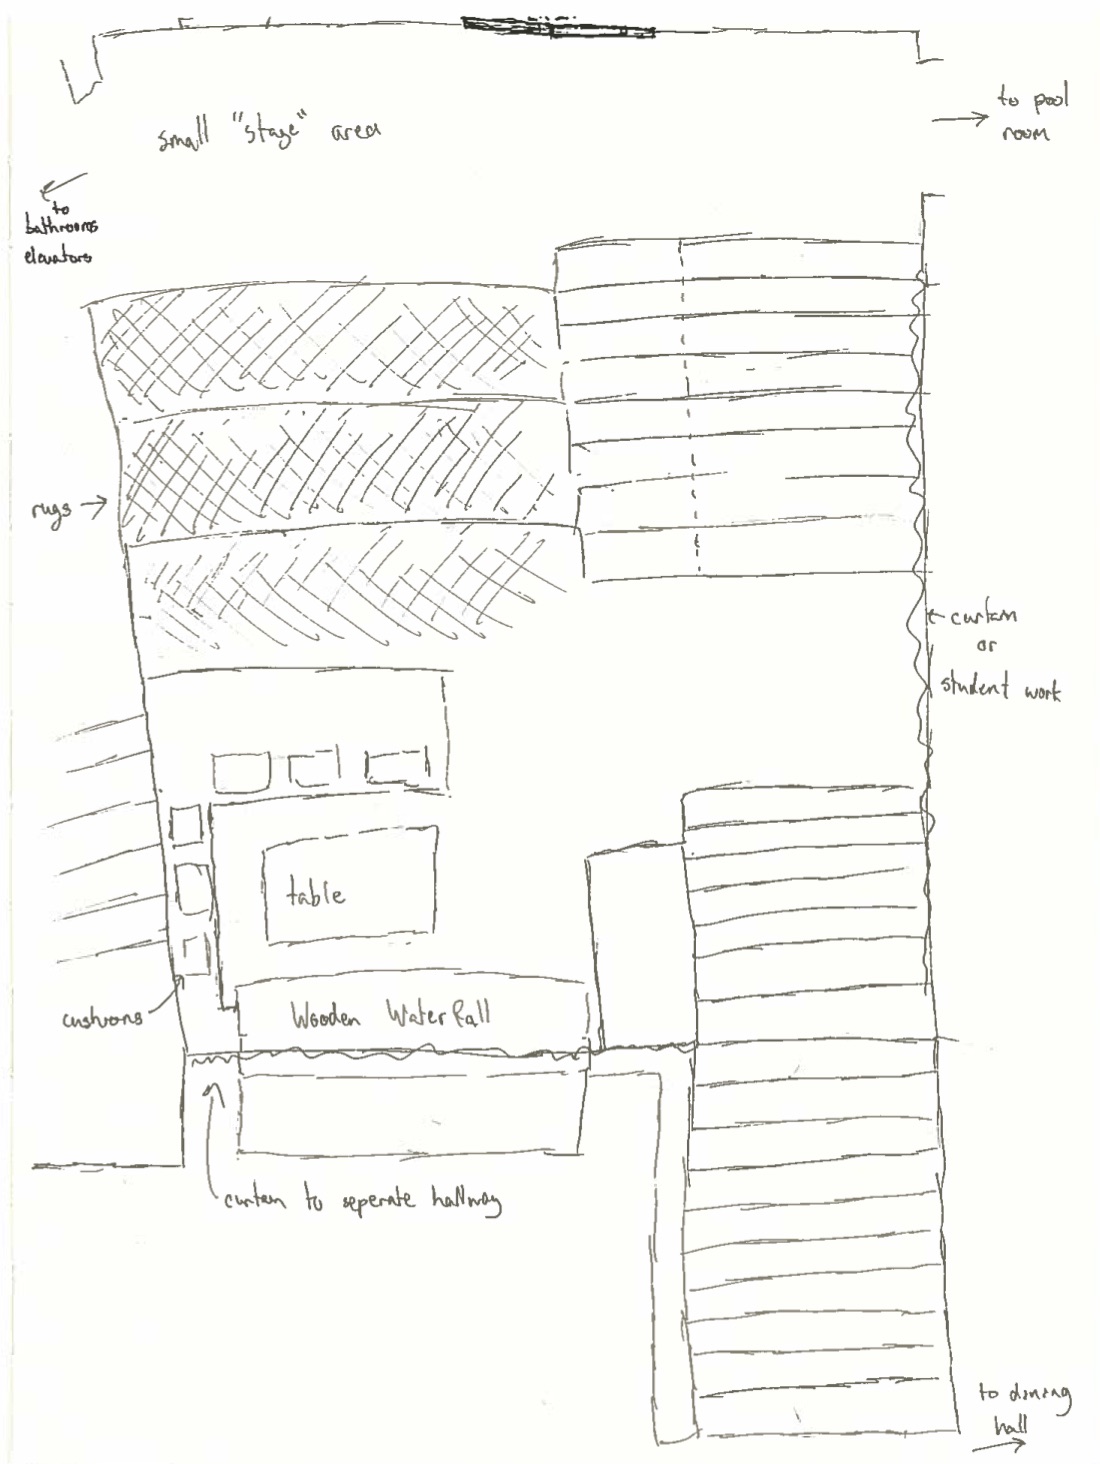 Initial sketch of rennovation plans